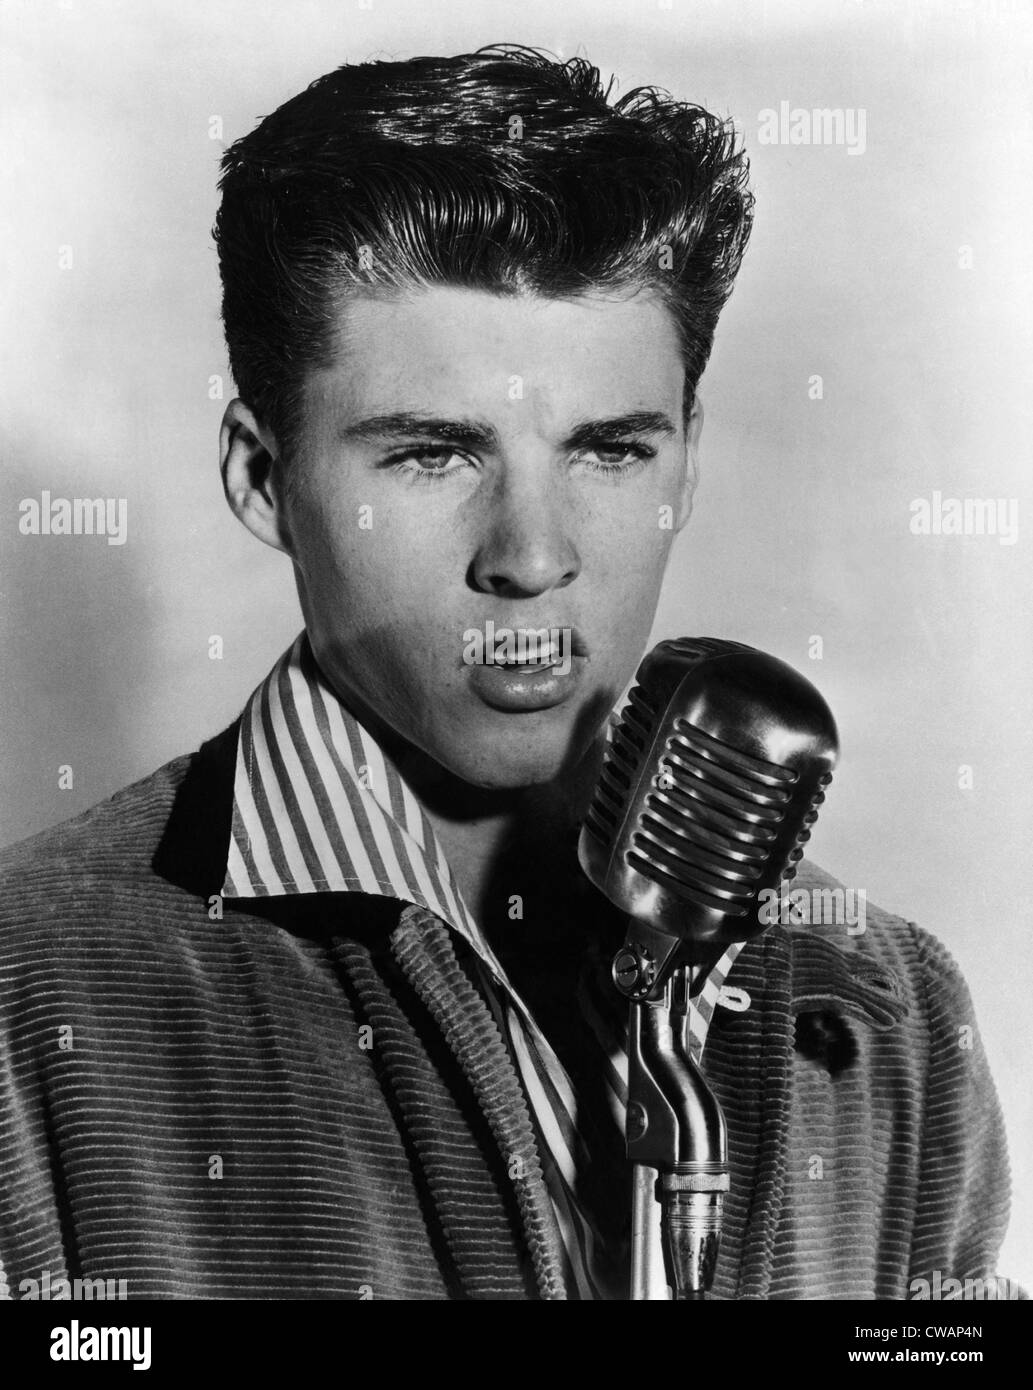 Singer and teen idol Ricky Nelson, (1940-1985), c. 1957.. Courtesy: CSU Archives / Everett Collection Stock Photo